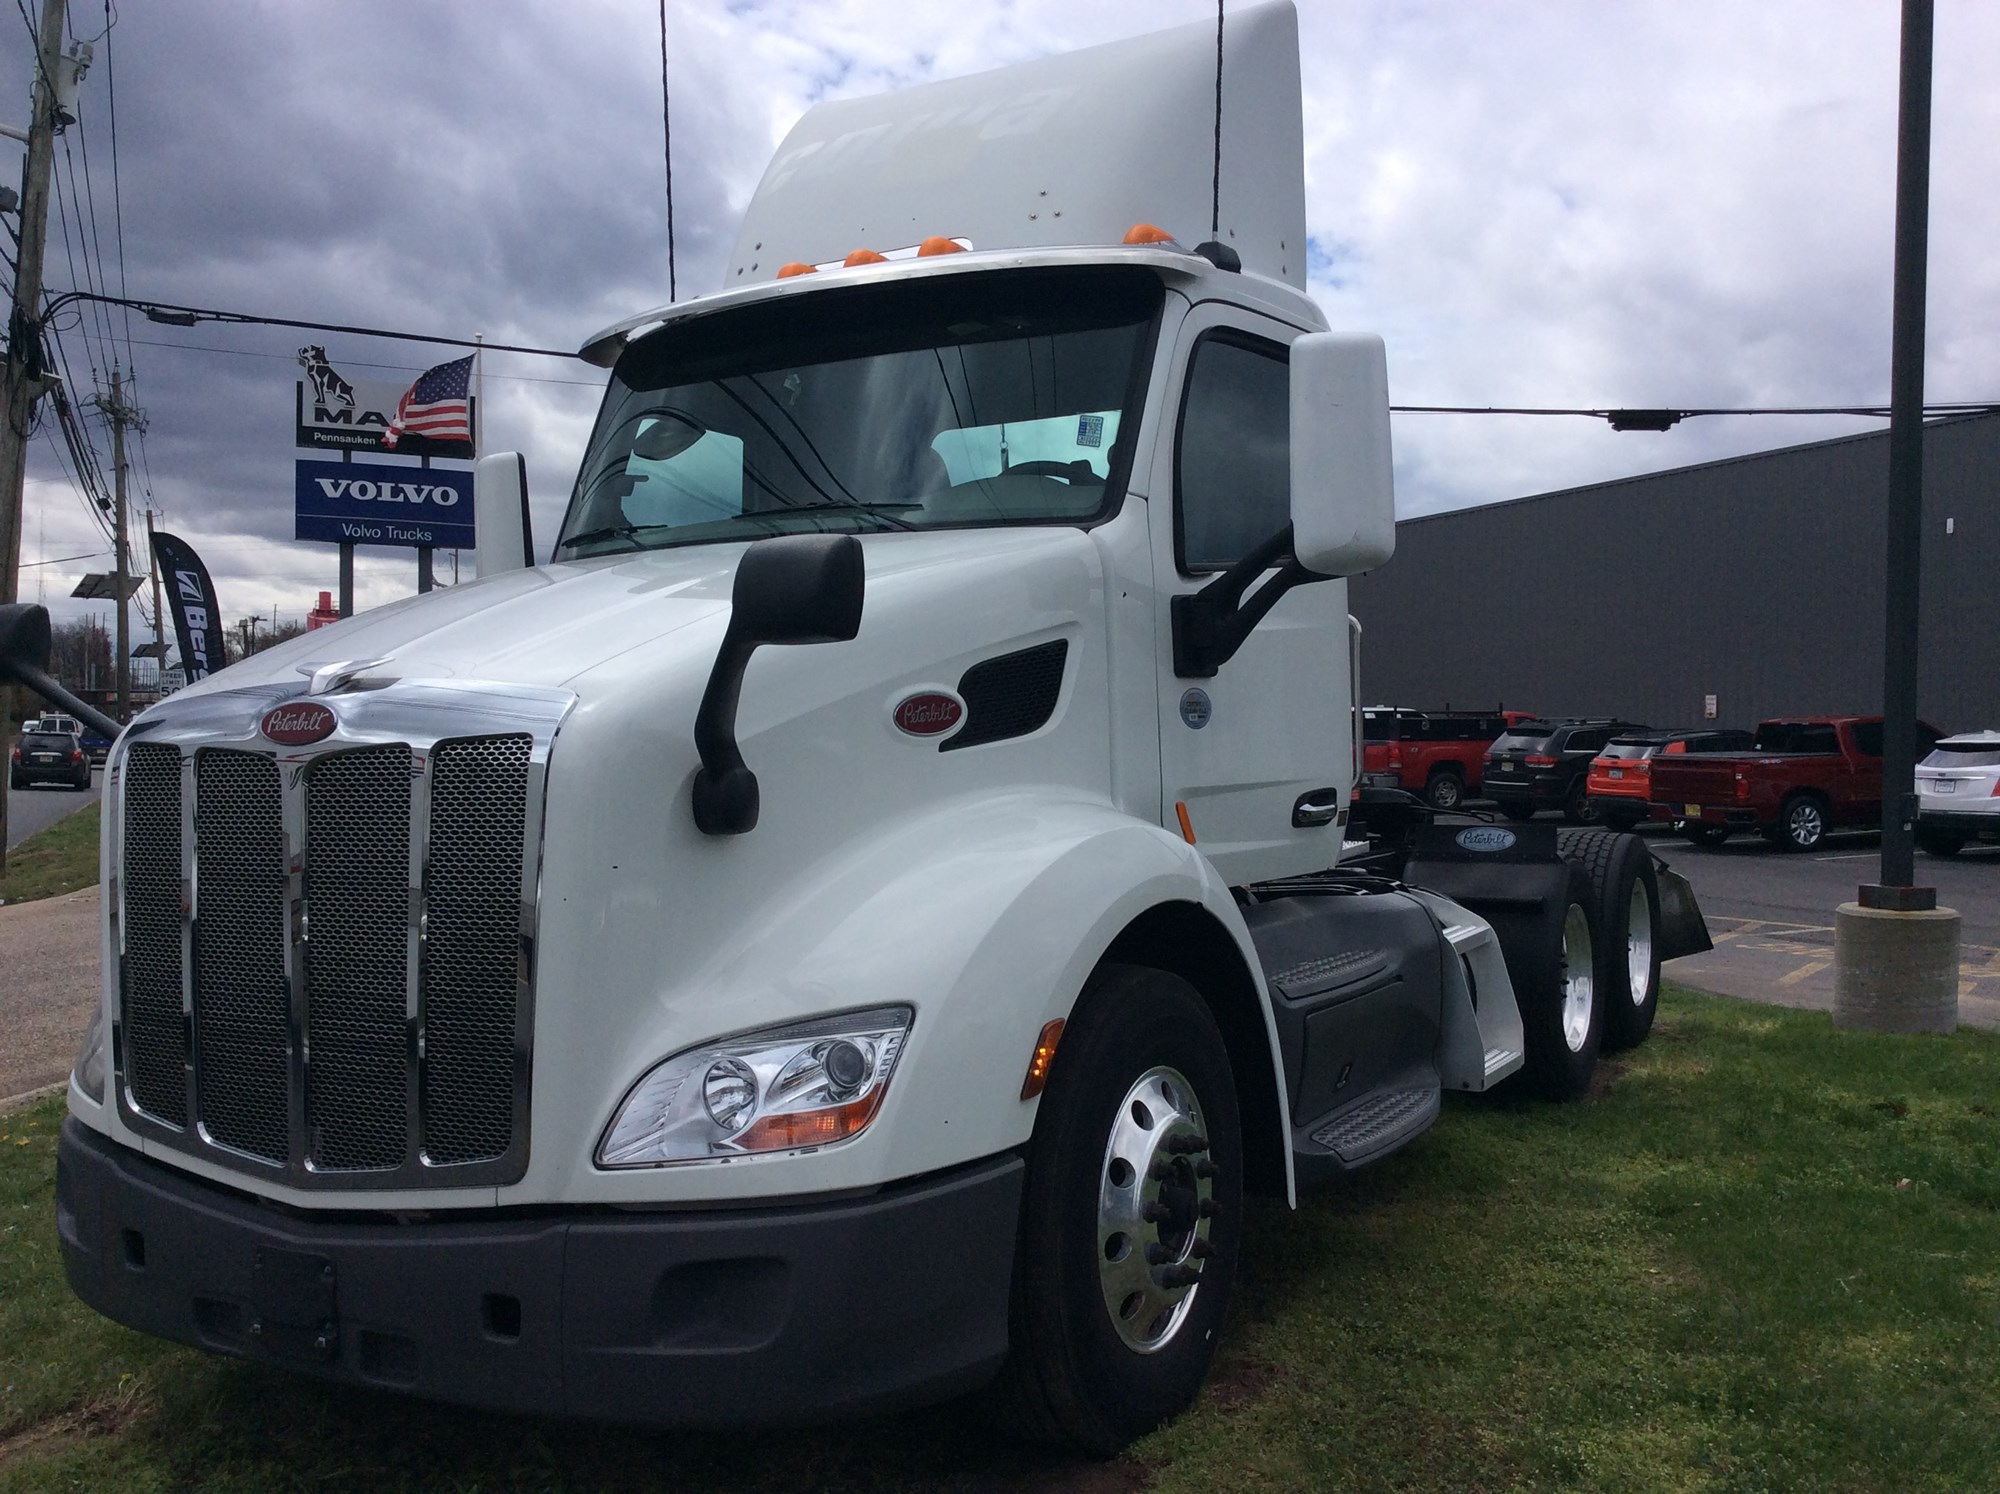 Used Truck Inventory - 1000879 01 - 13